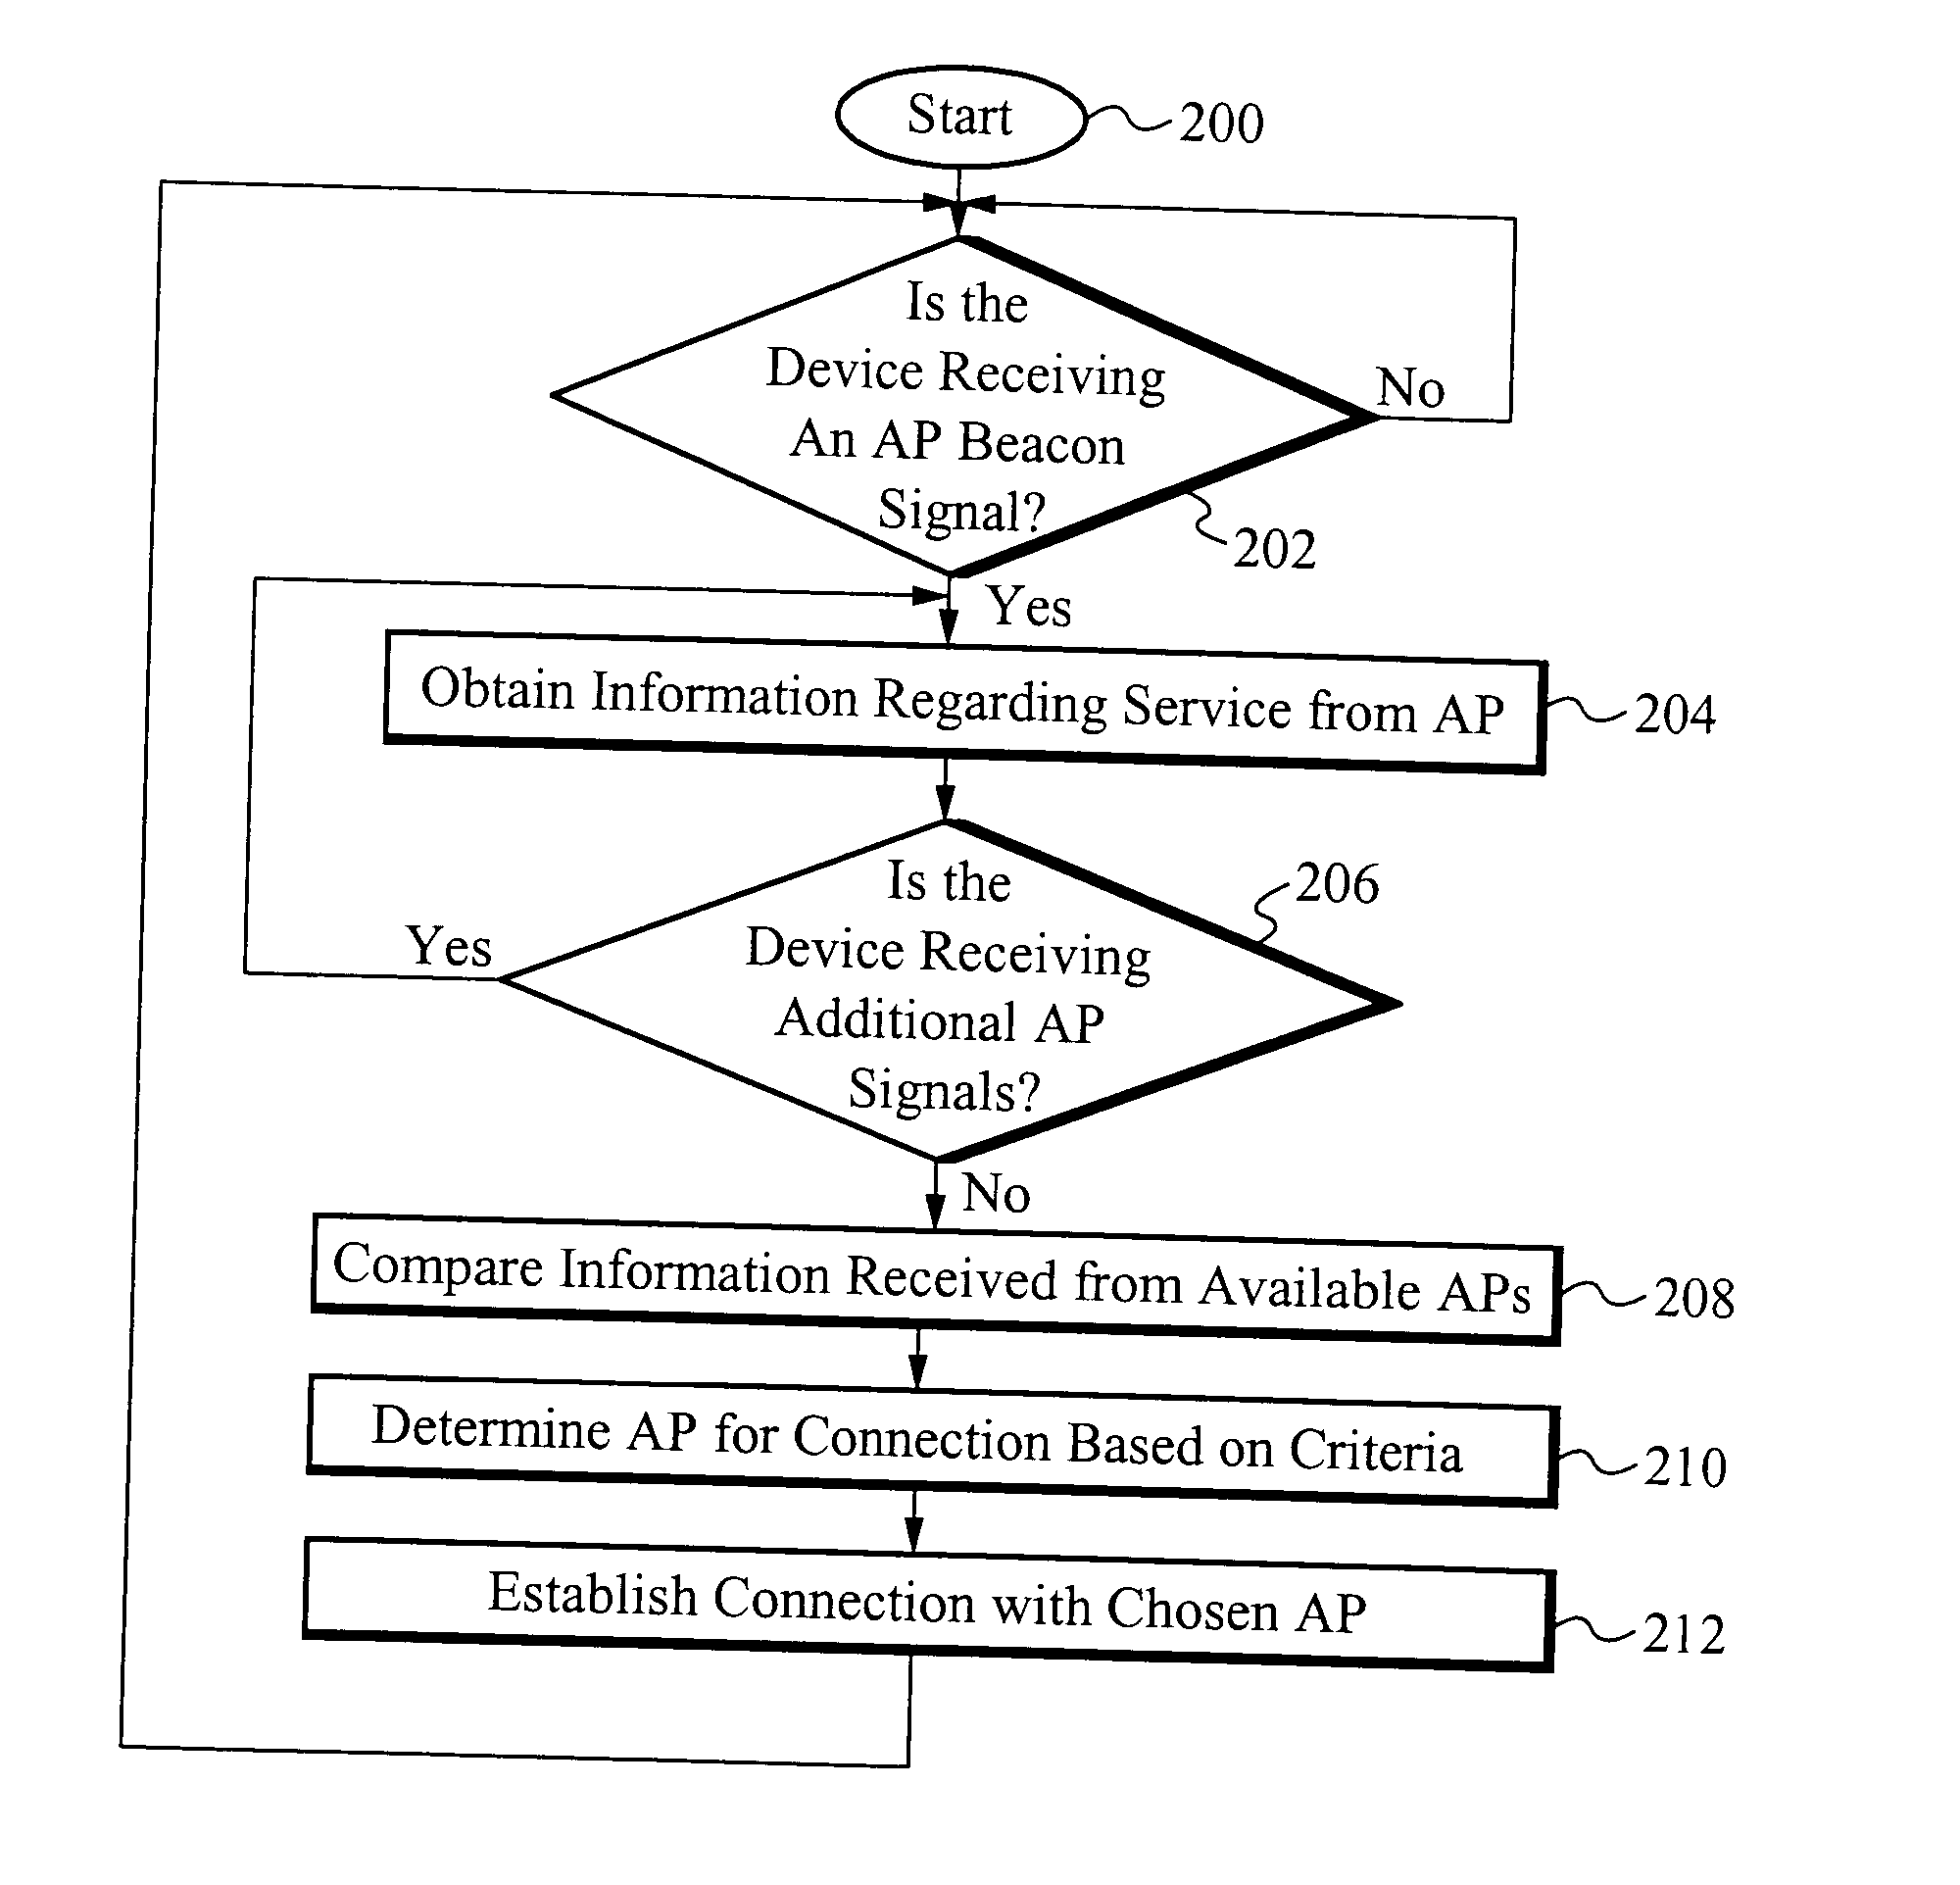 Method of and apparatus for adaptively managing connectivity for mobile devices through available interfaces